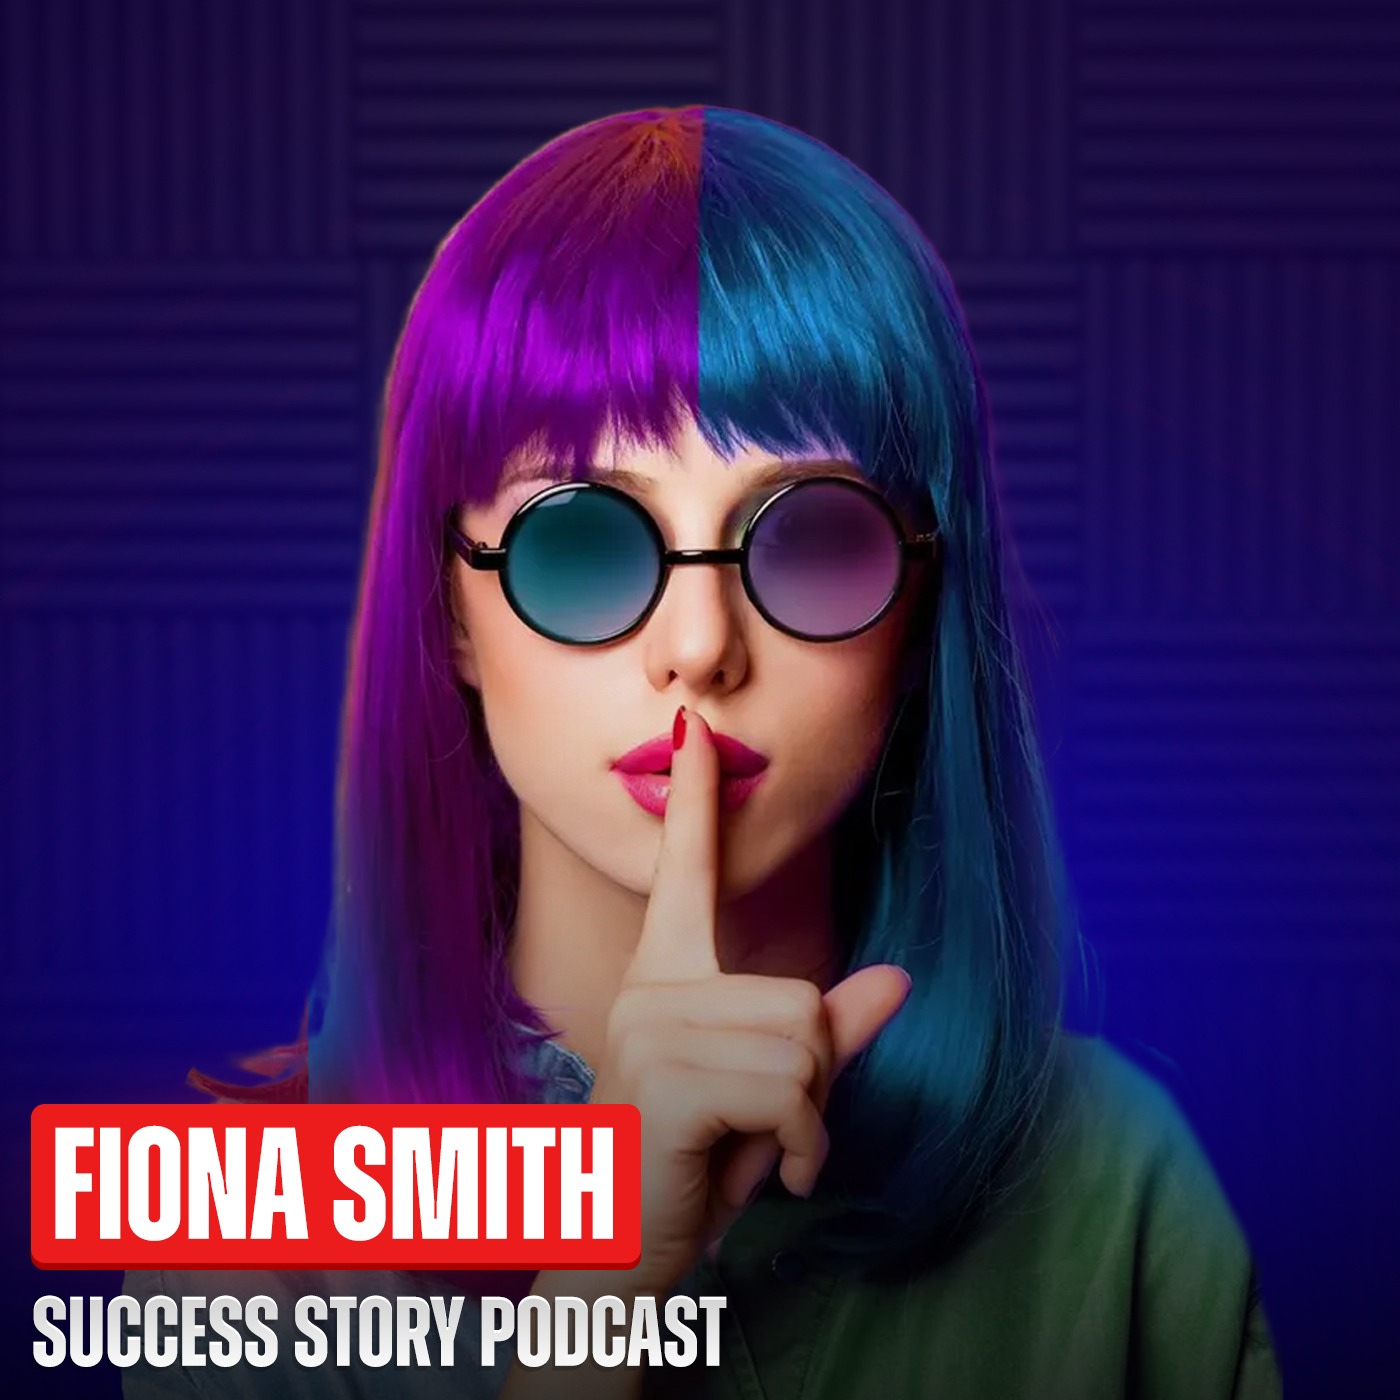 Starting a Business and Exposing Money Myths | Fiona Smith - Founder of Millennial Money Woman